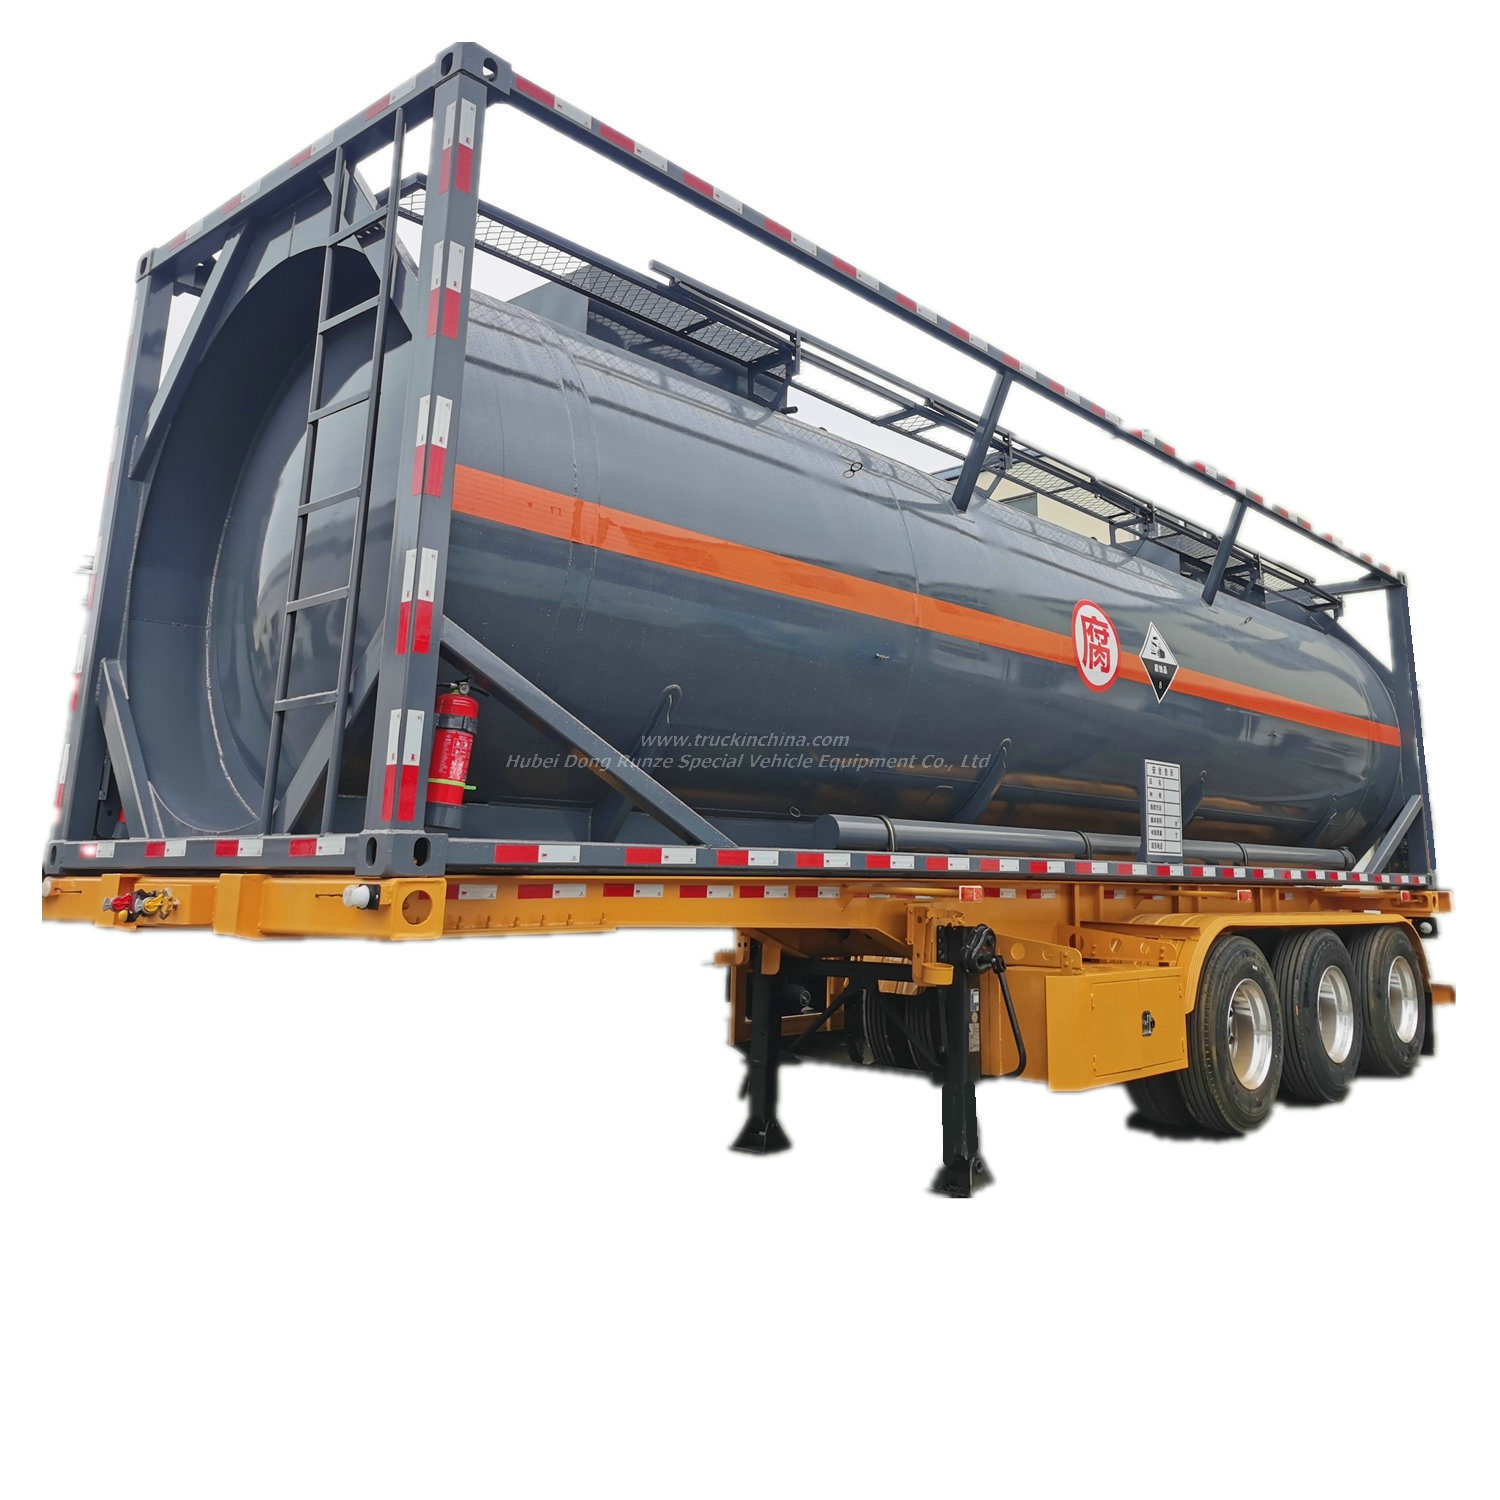 Customize 30FT/40FT Imo ISO Tank Container Lined PE for Petrochemicals Sulfuric Acid,Hydrochloric Acid